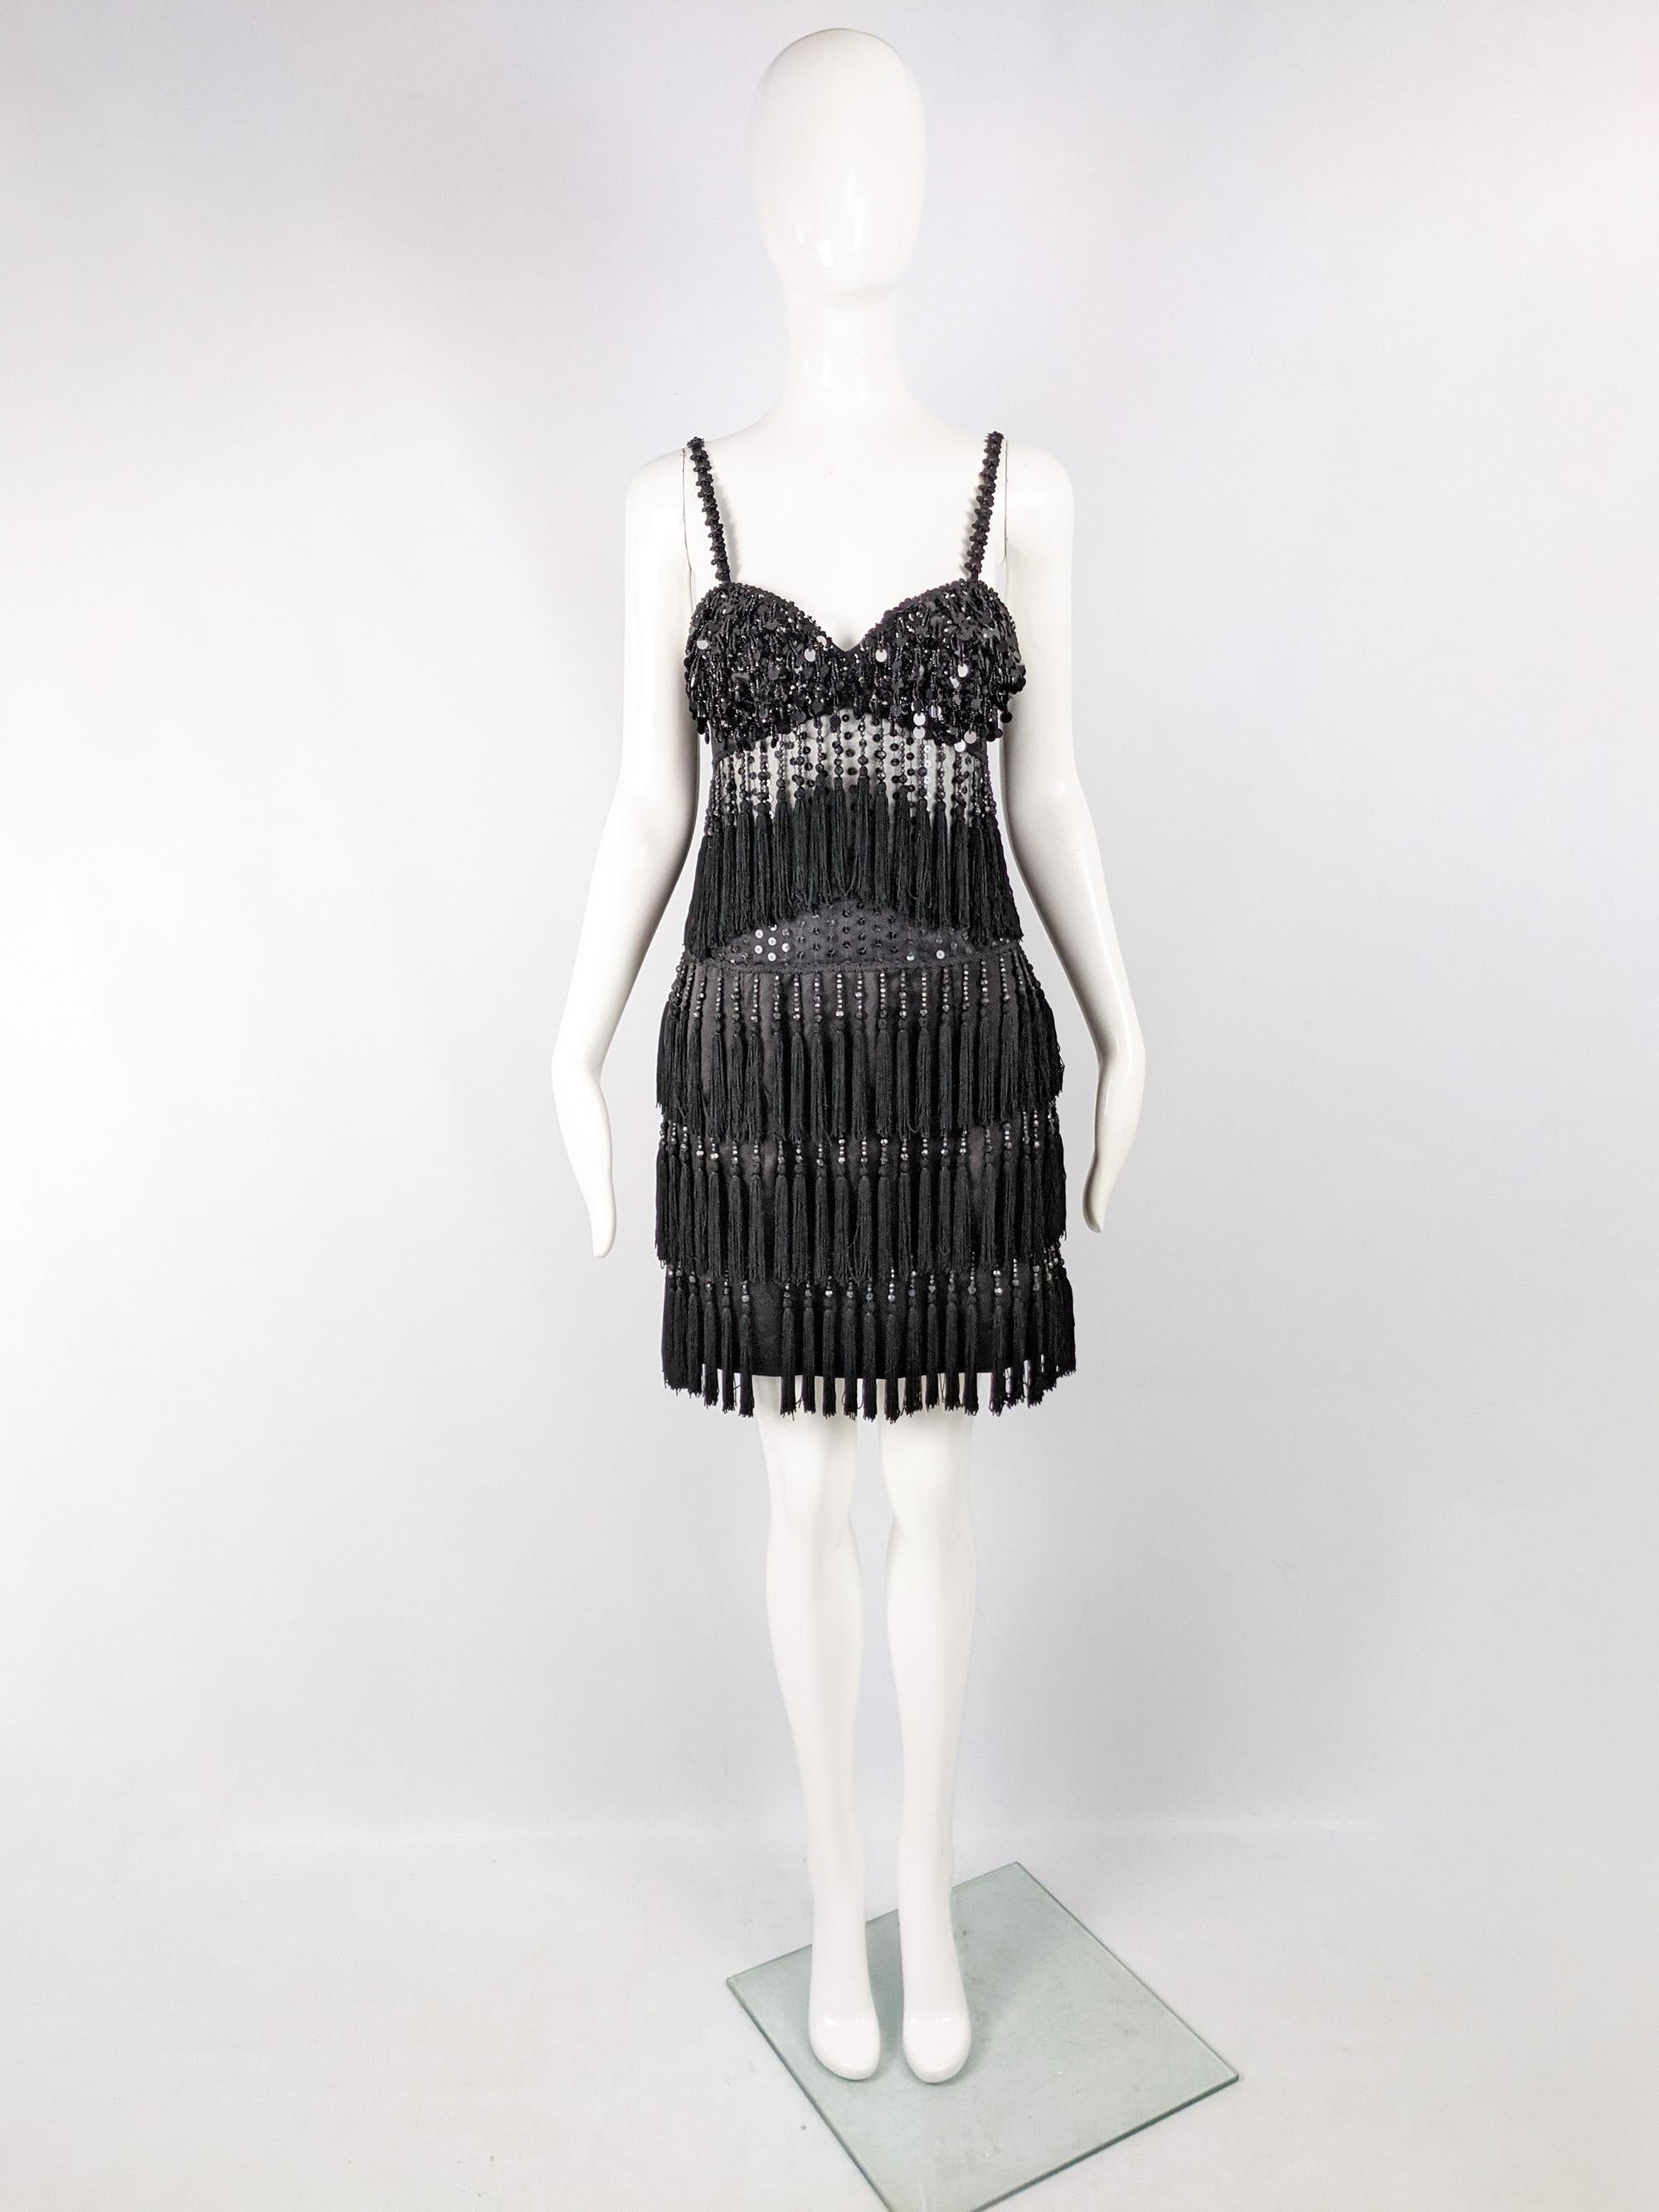 An incredibly sexy vintage womens party / evening dress from the 80s by luxury British label, Bellville Sassoon. In a beaded mesh fabric that is sheer at the midriff with amazing fringes creating amazing movement and a 1920s inspired flapper look.